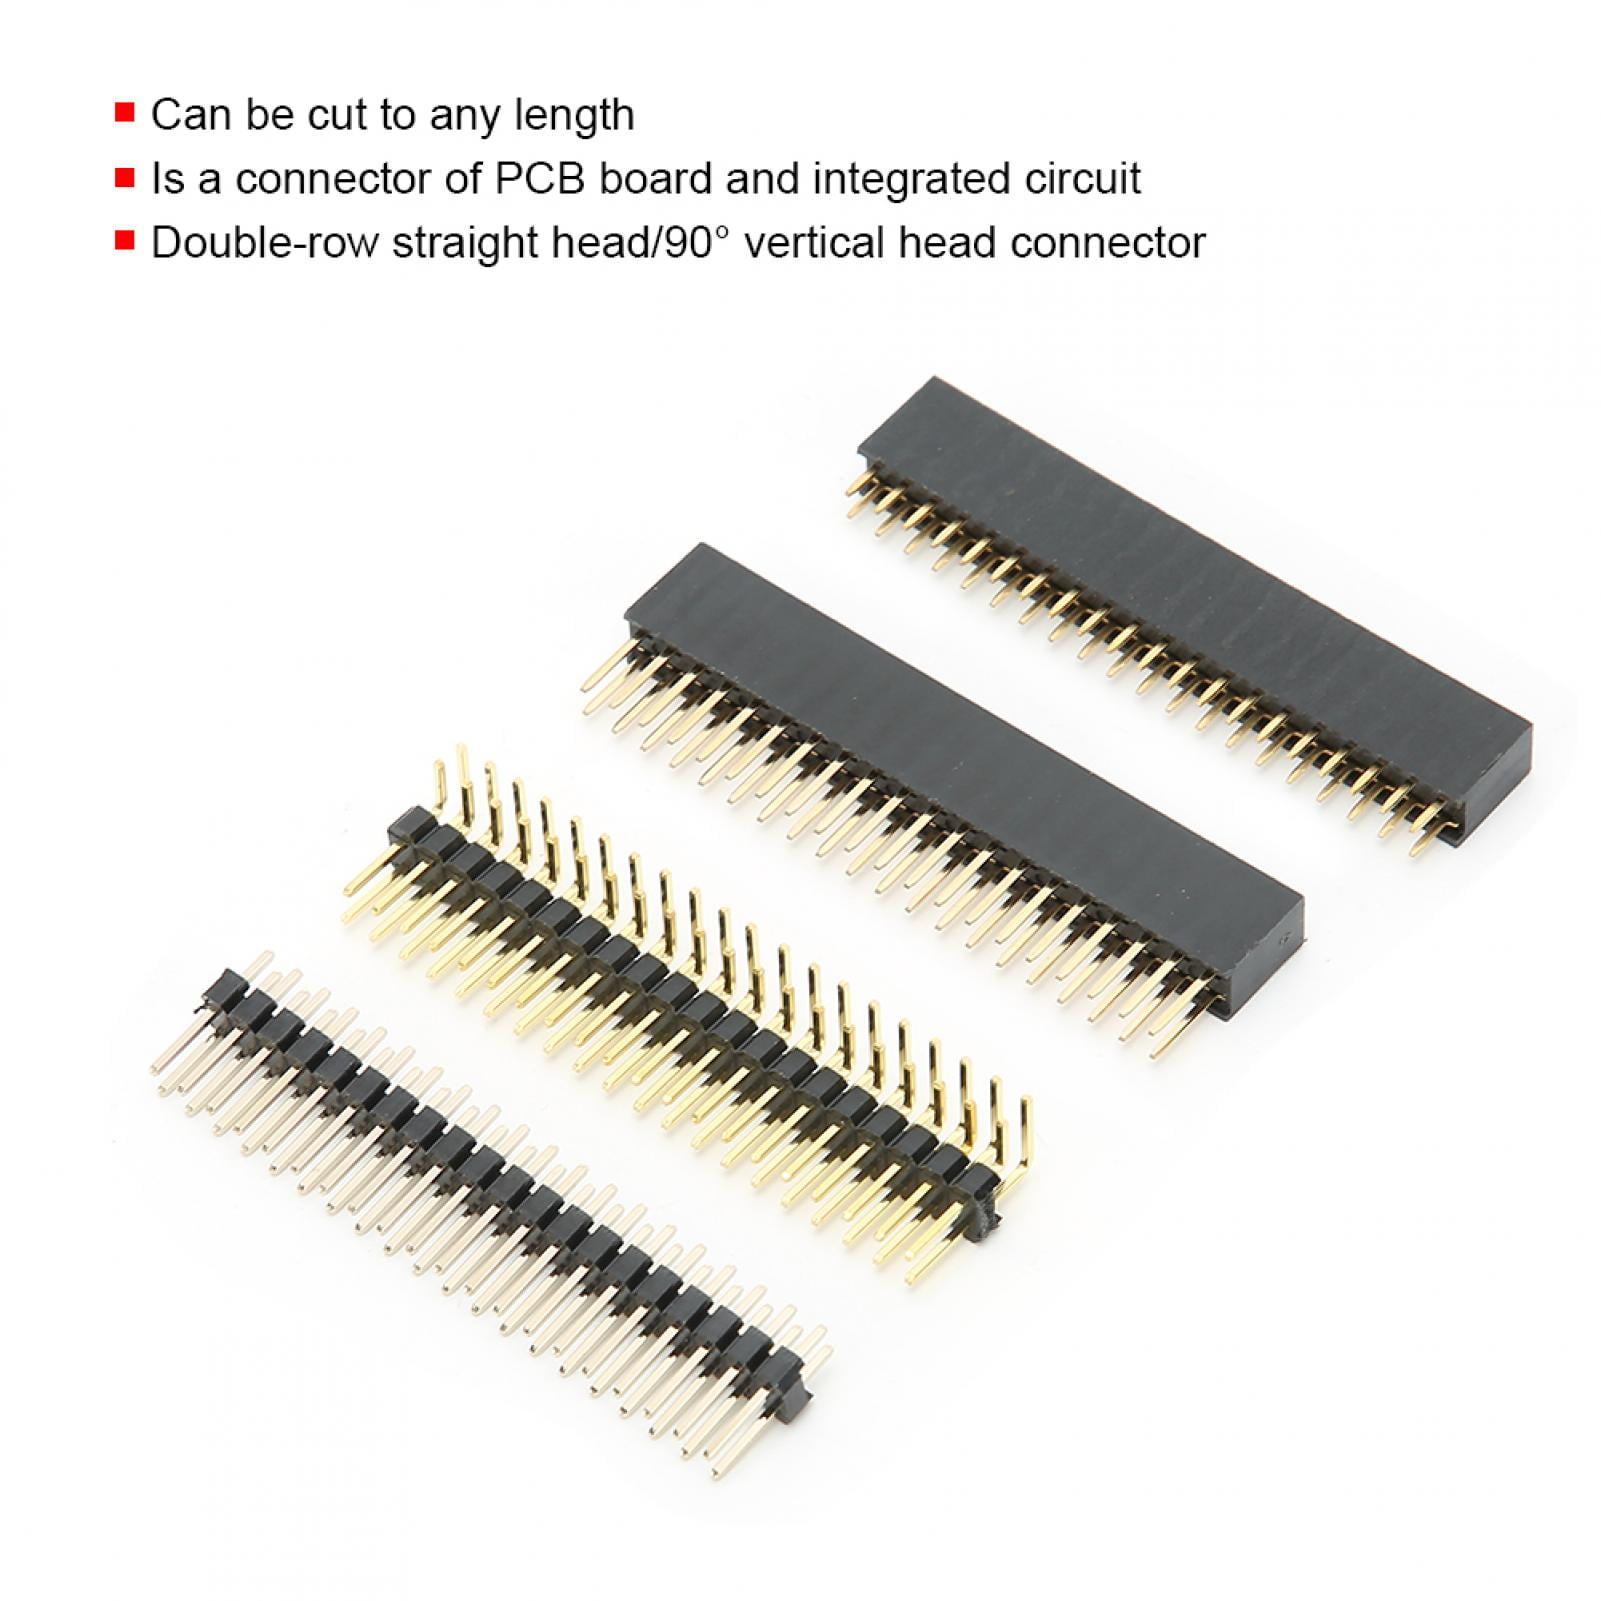 Pitch 2.54mm 10x 6 Pin Single Row 15mm Tall Header Socket Connector for Arduino 